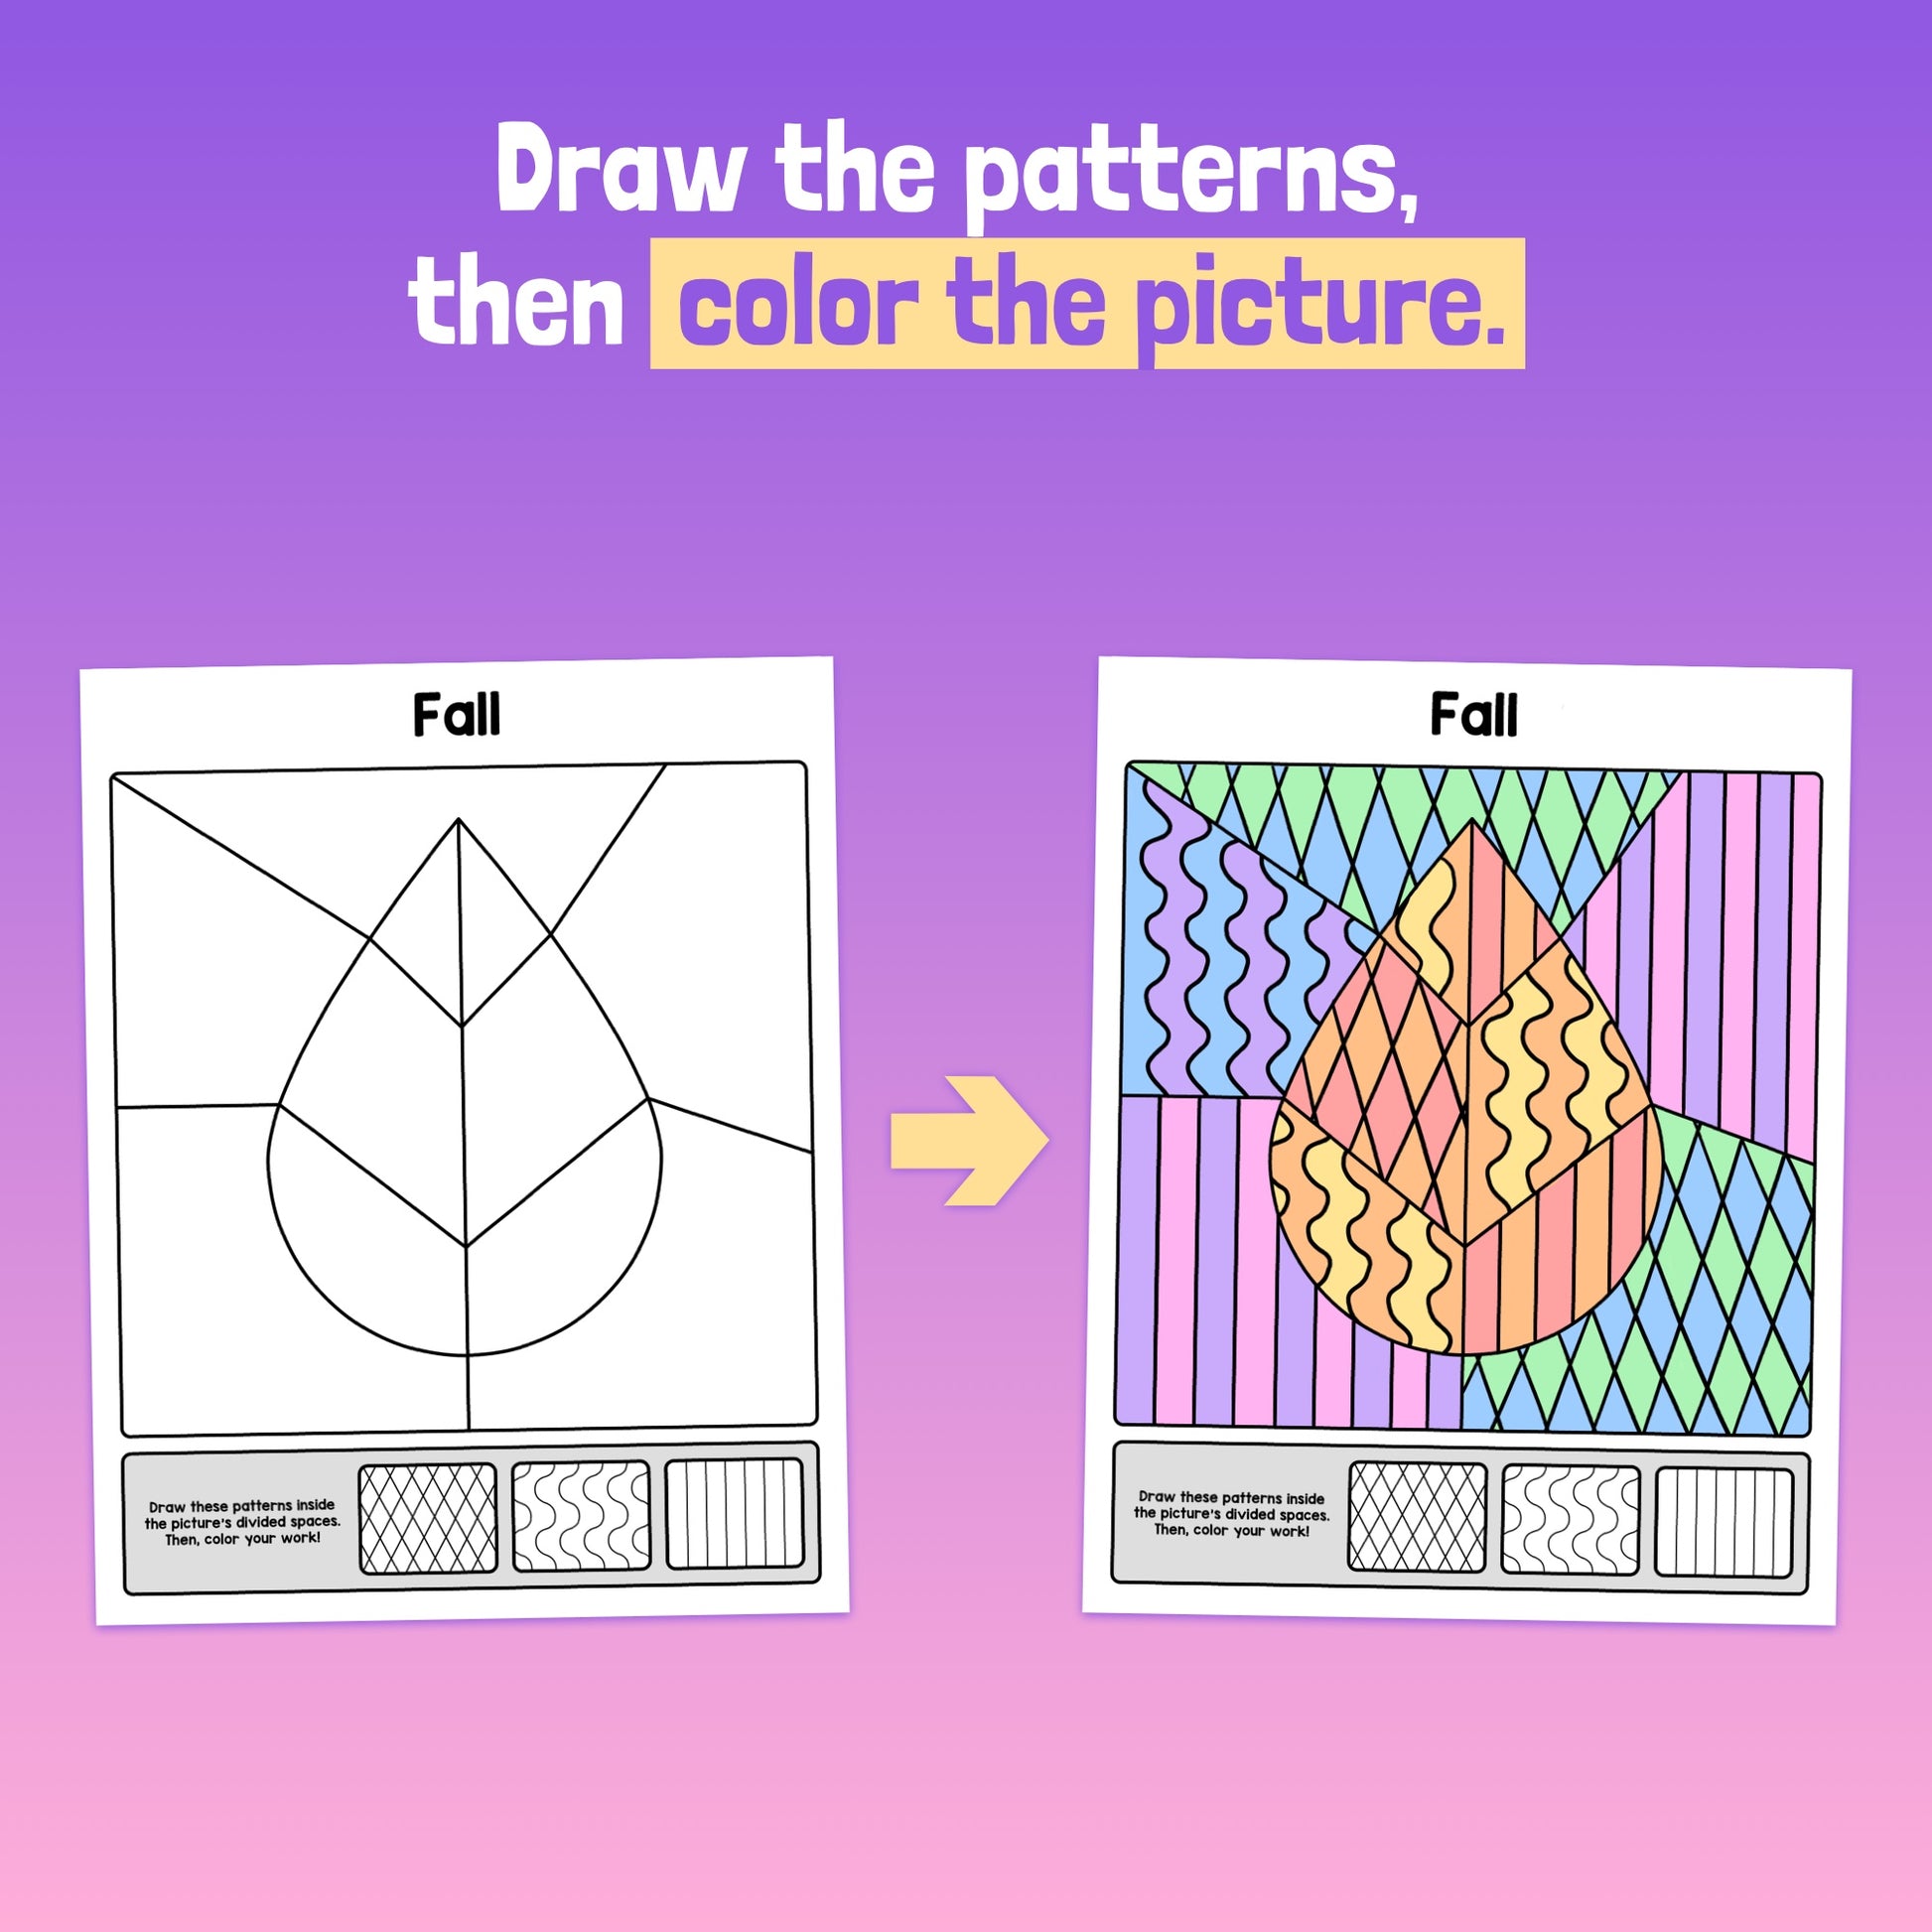 Pattern coloring activities for kids